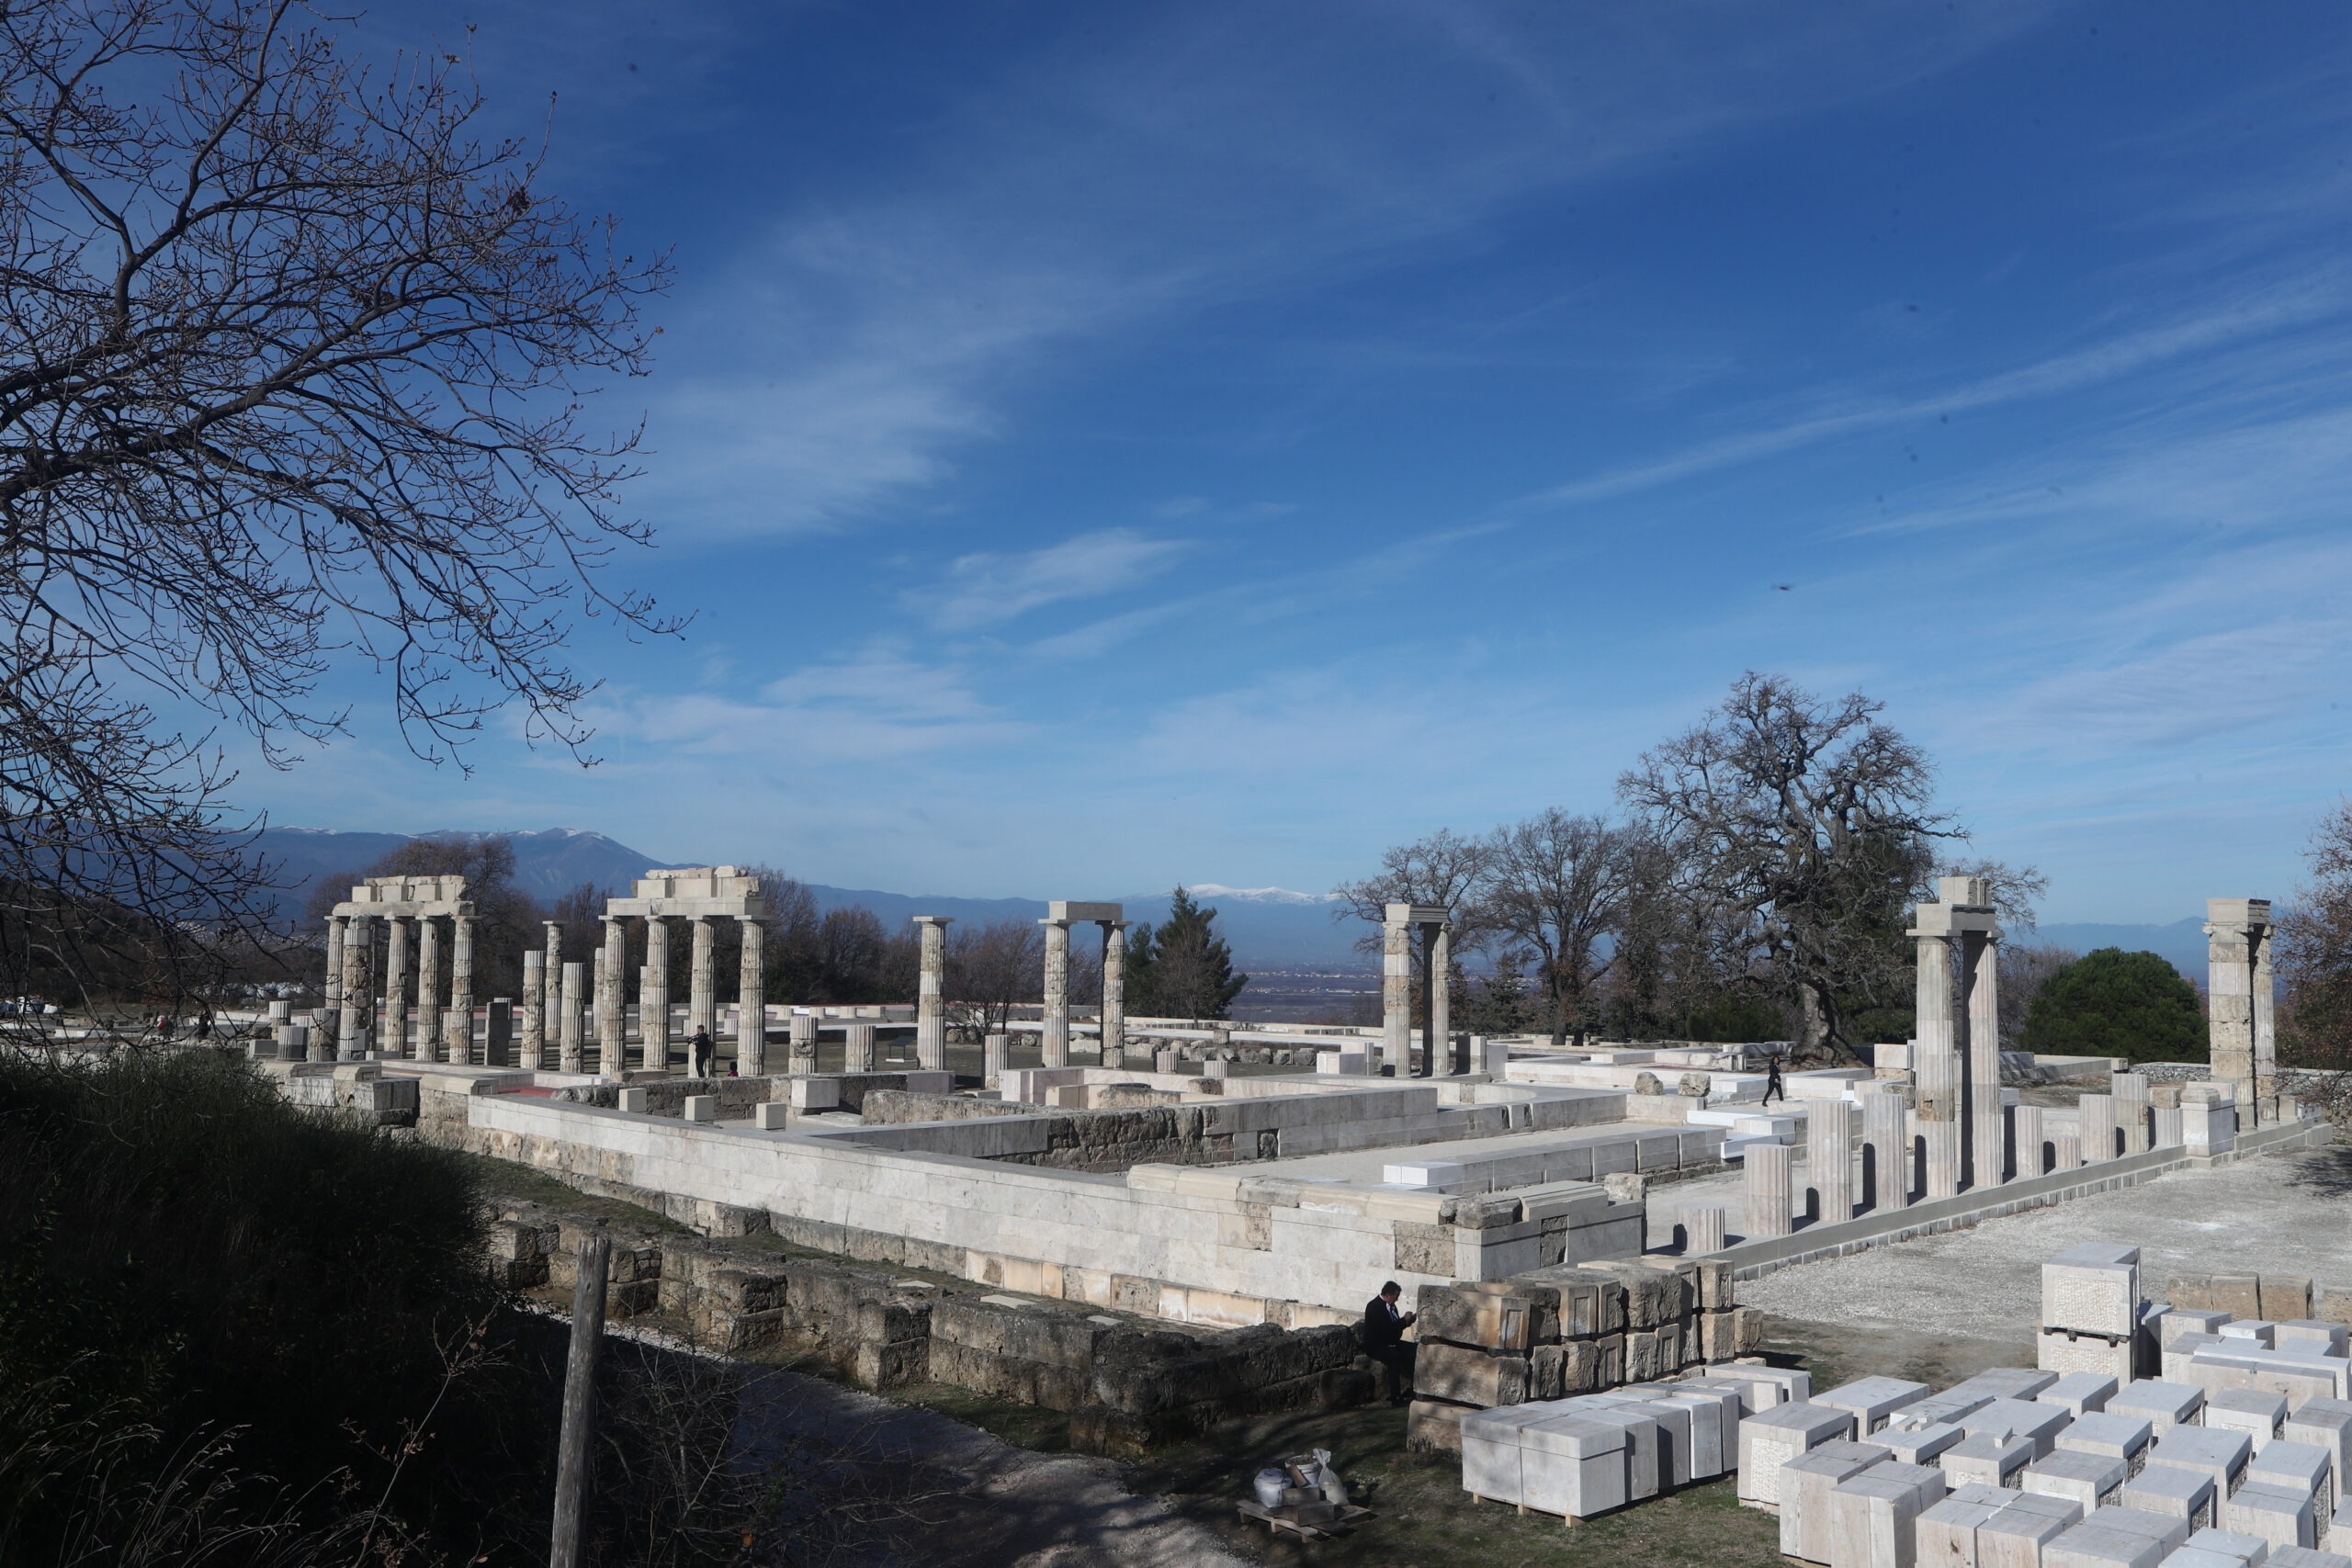 Philip of Macedon’s palace reopens